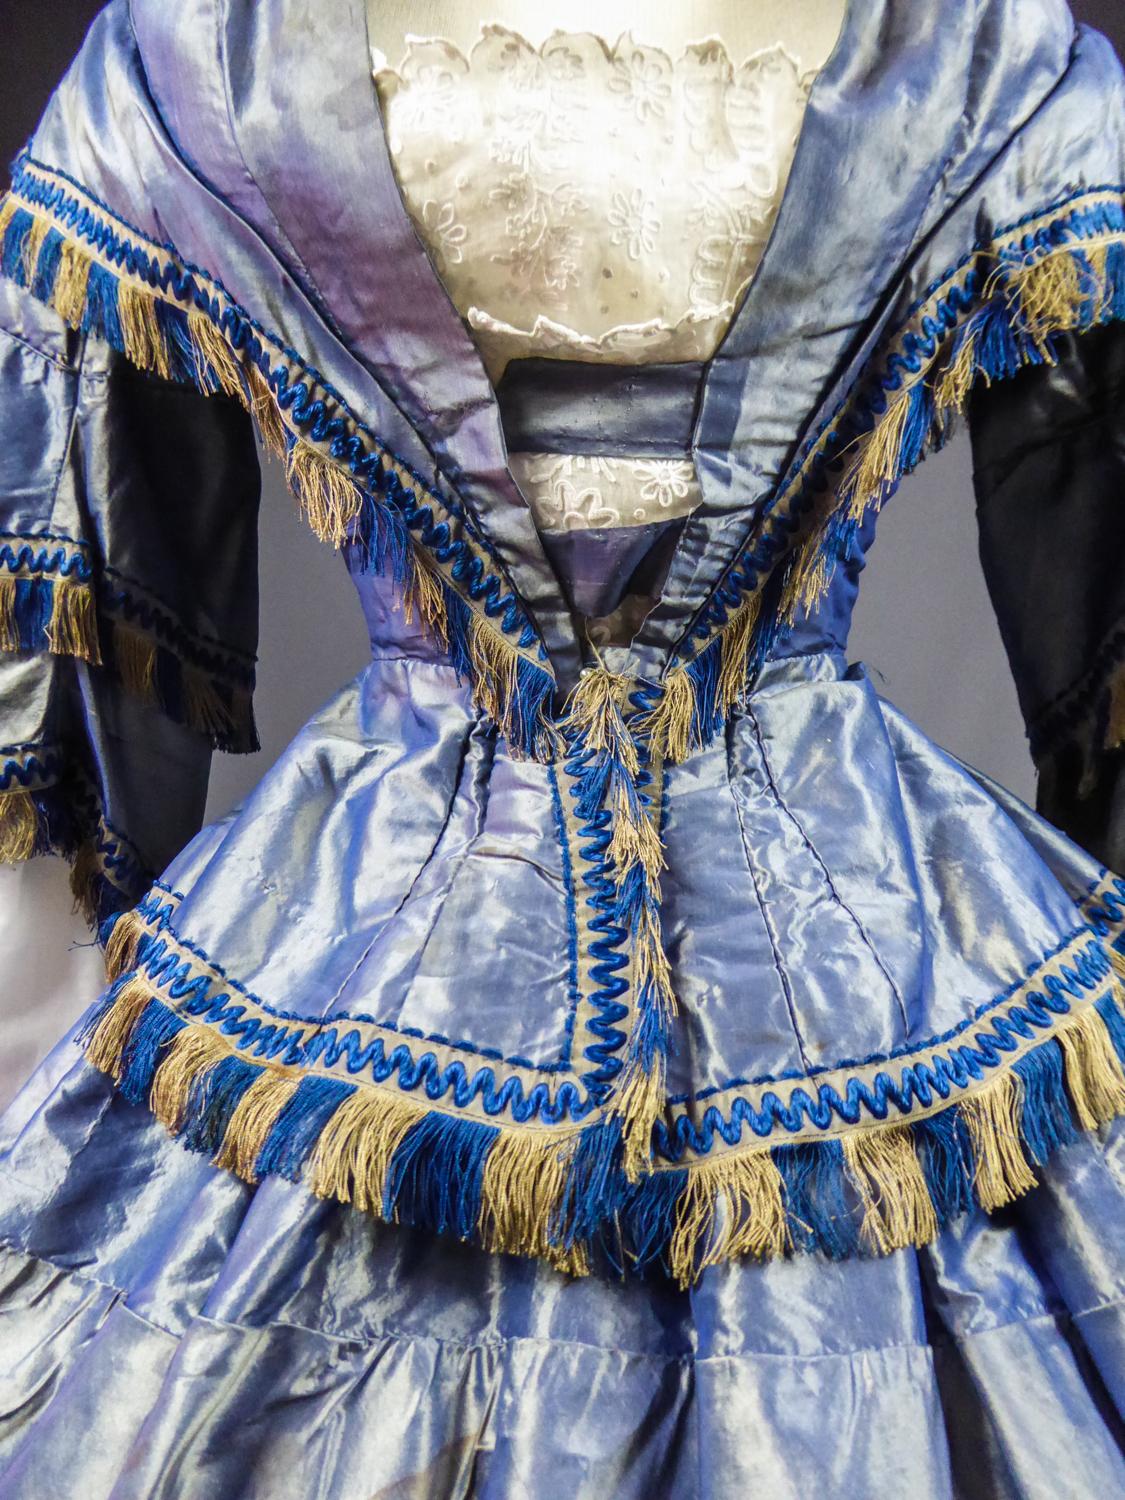 Circa 1855
France

French Day dress with bodice and round crinoline skirt in changing and noising taffeta dating from the beginning of the Second French Empire. Boned bodice with integrated pleated capelet and large basques with taffeta knot on the